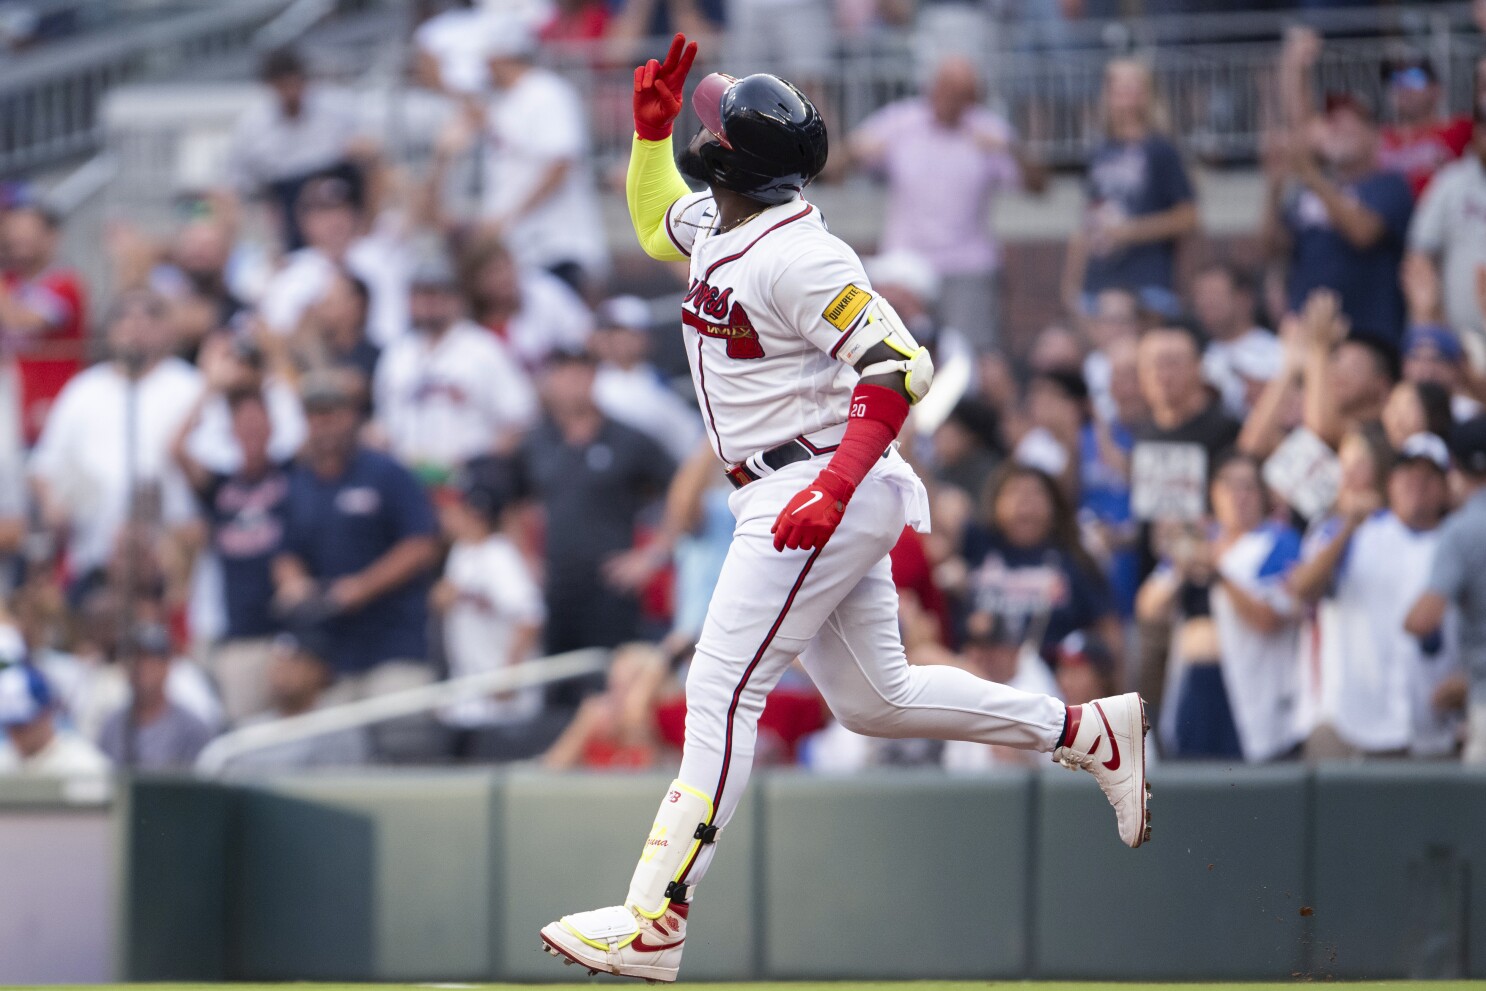 He struck out a guy on a broken leg.' Braves take Game 1, but lose